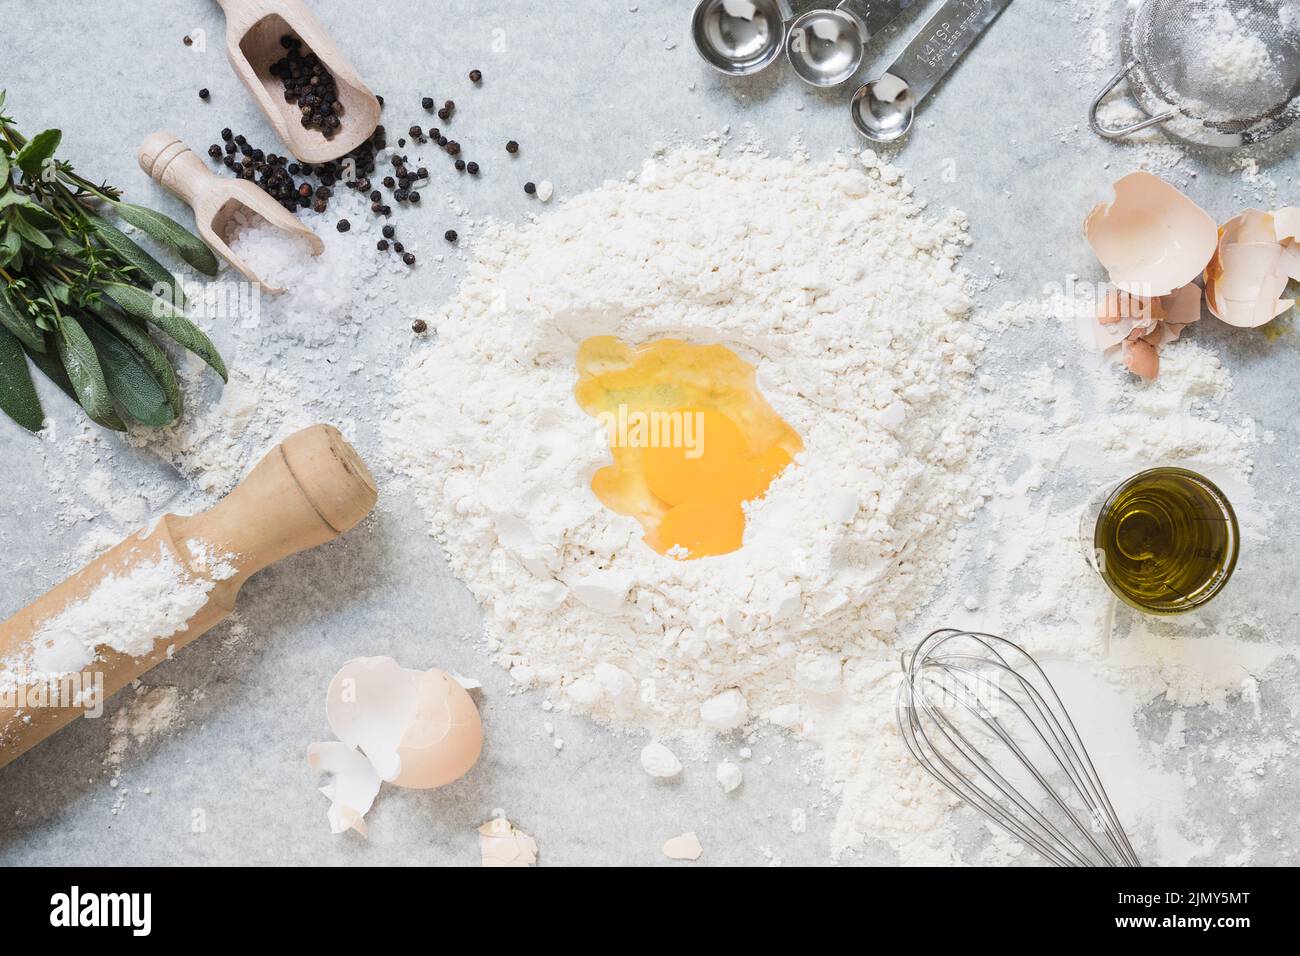 Ingredients making dough bread cake marble top Stock Photo